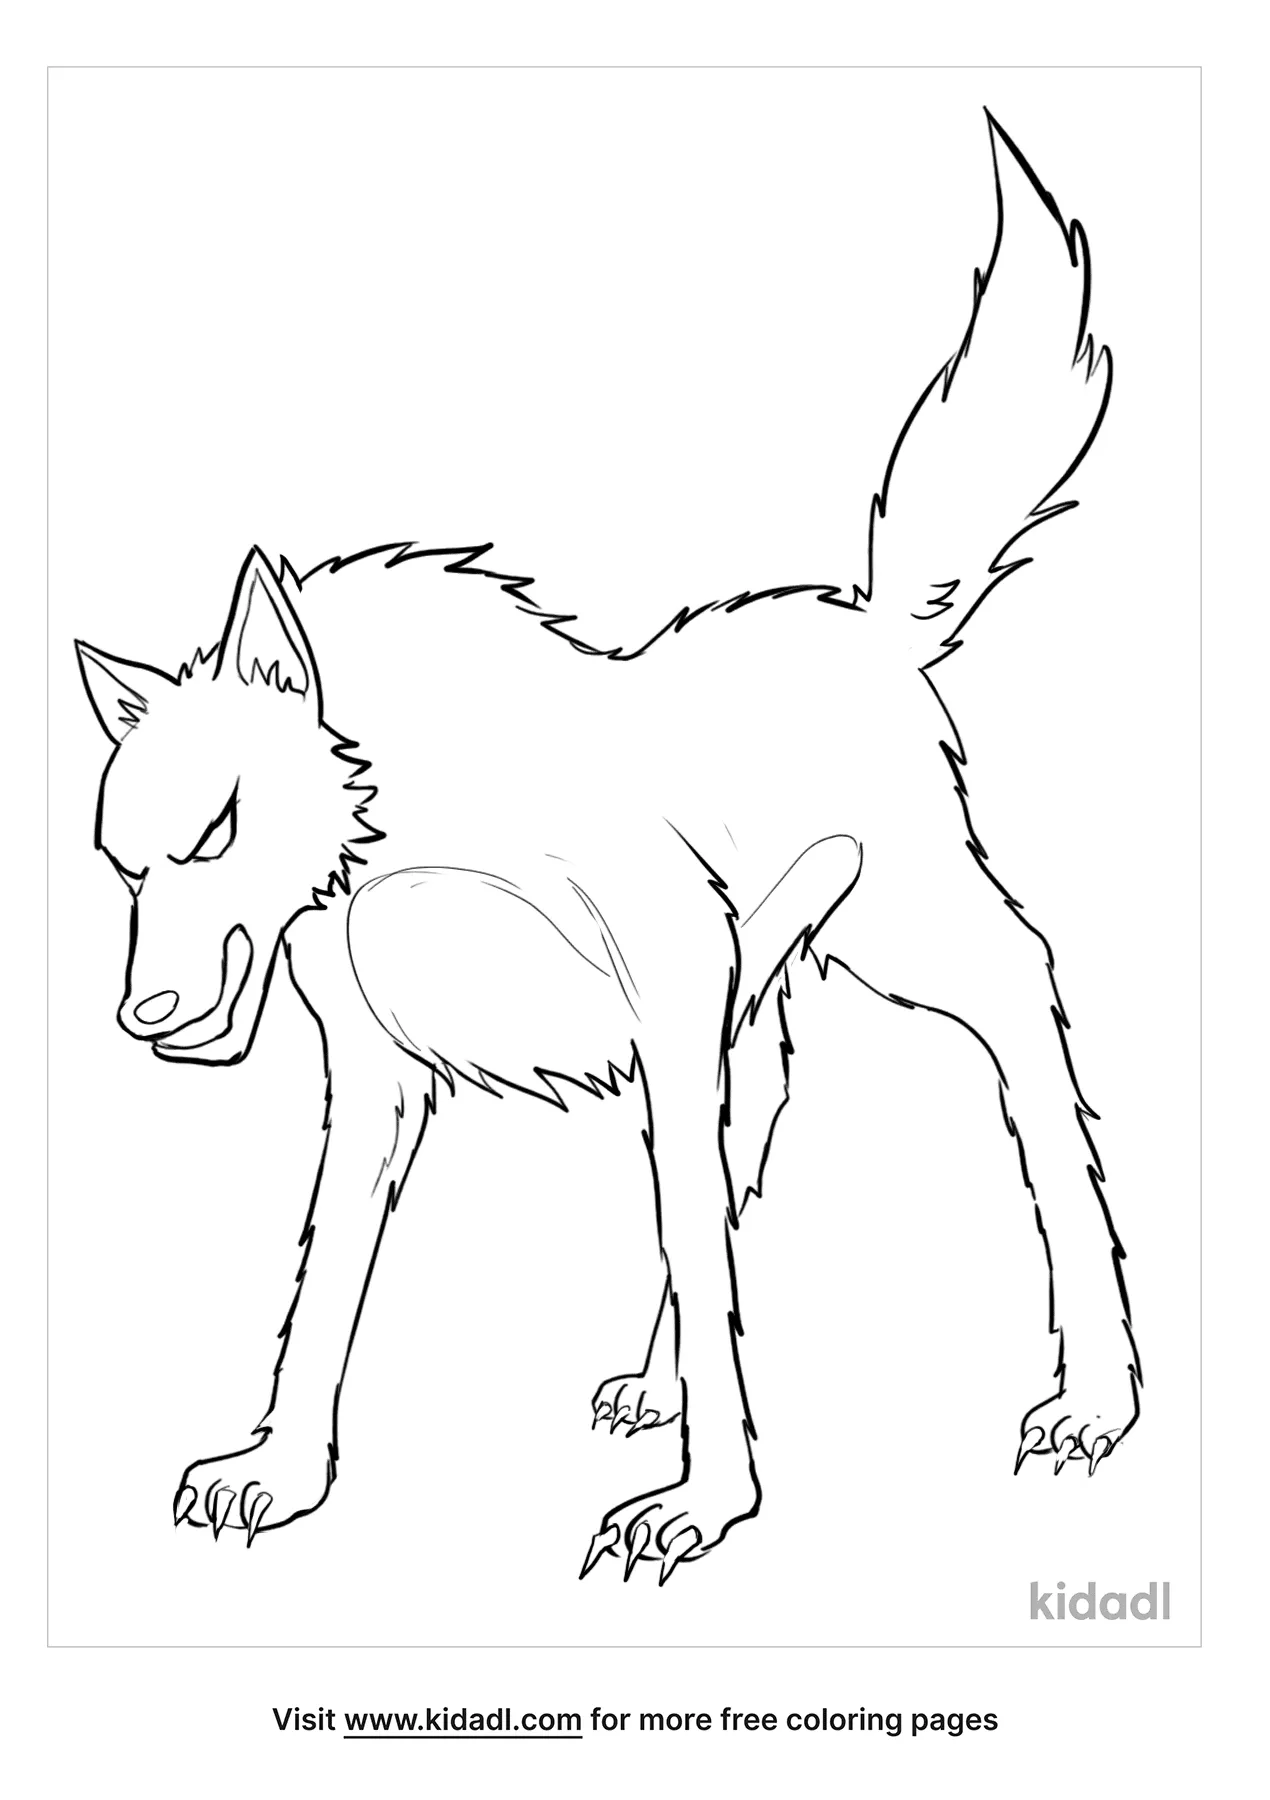 Anime Wolf Coloring Pages   Free Animals Coloring Pages   Kidadl